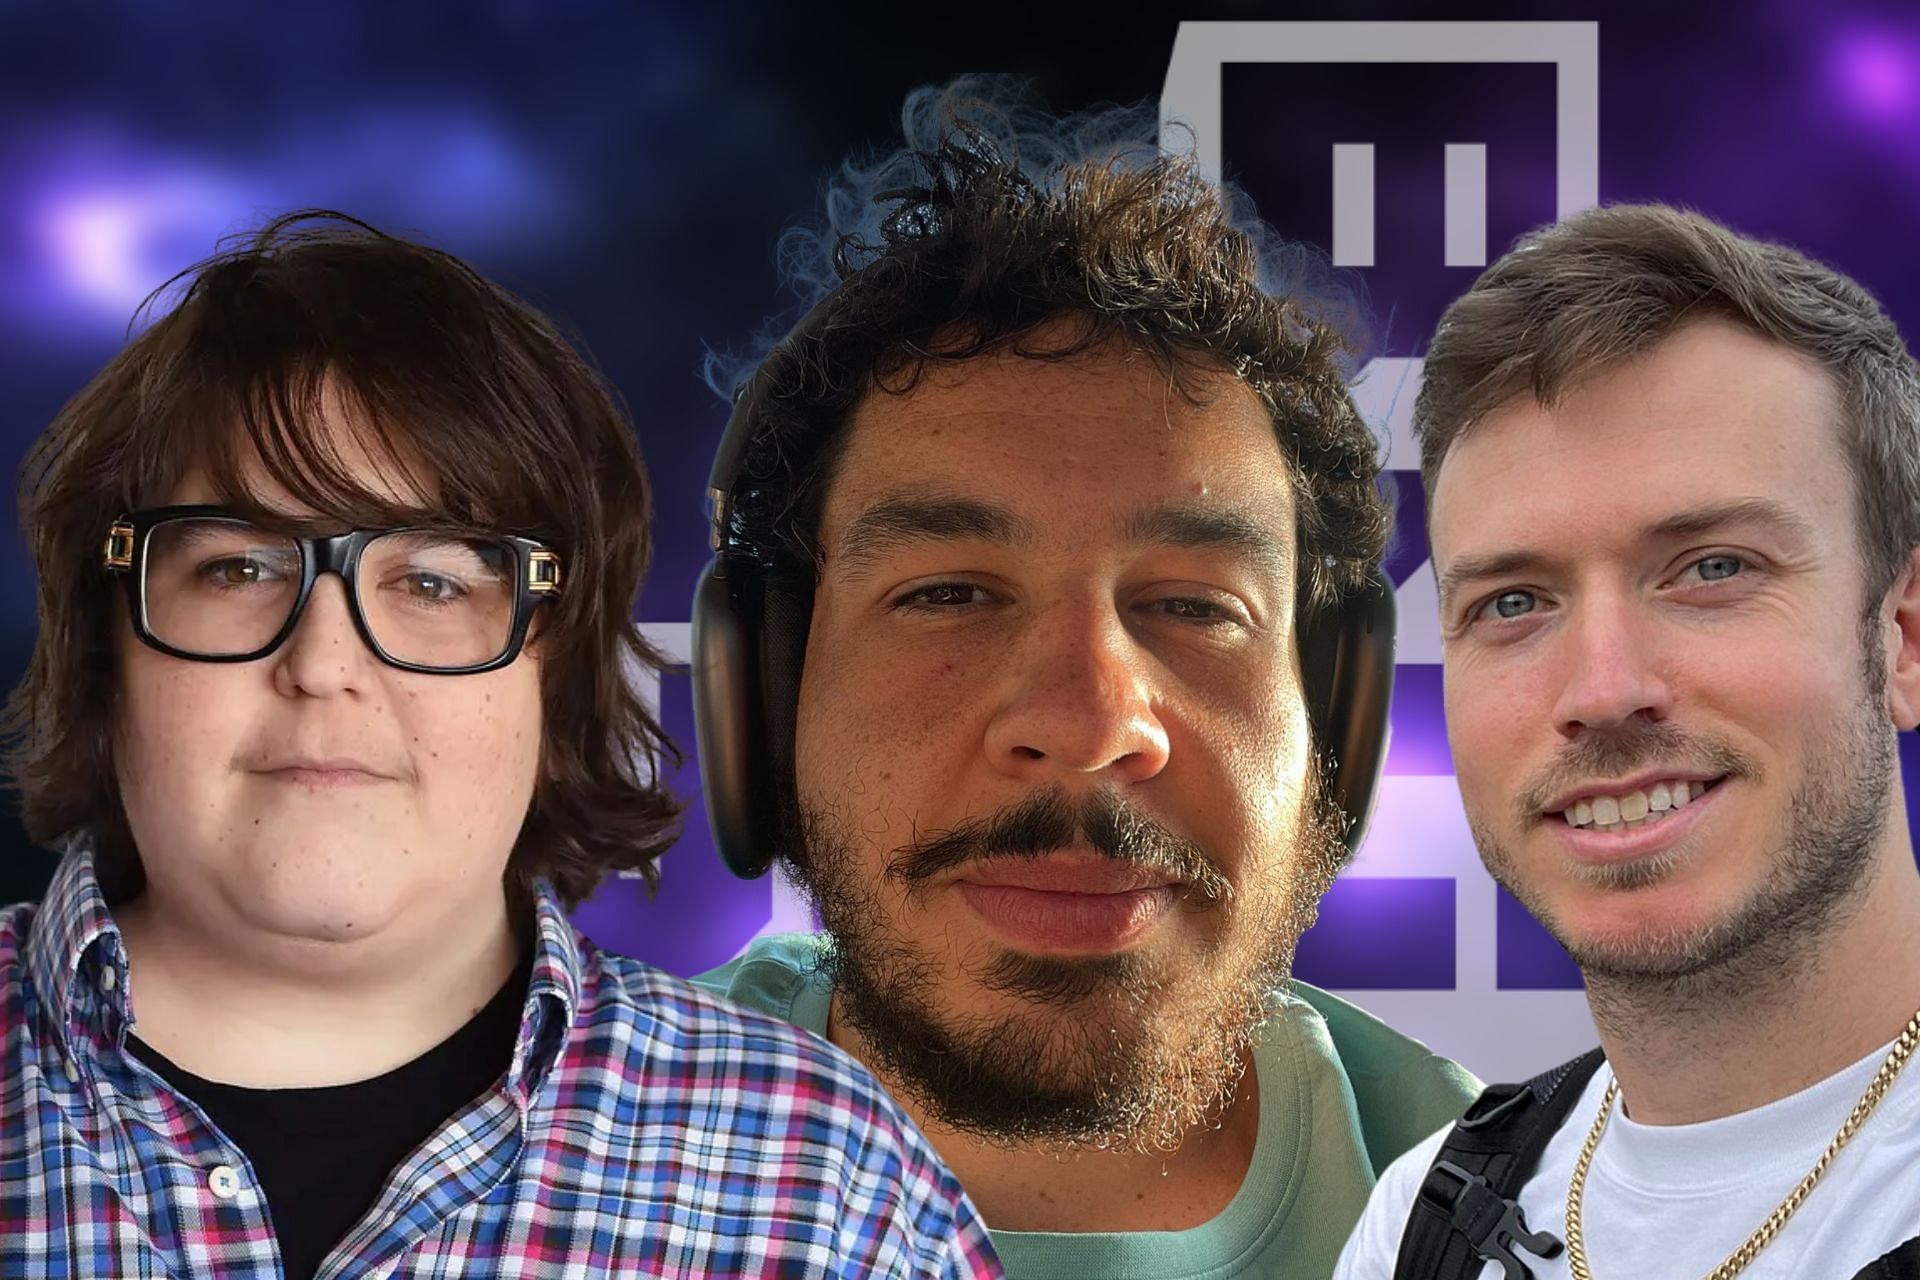 Italy: most followed Twitch streamers 2023